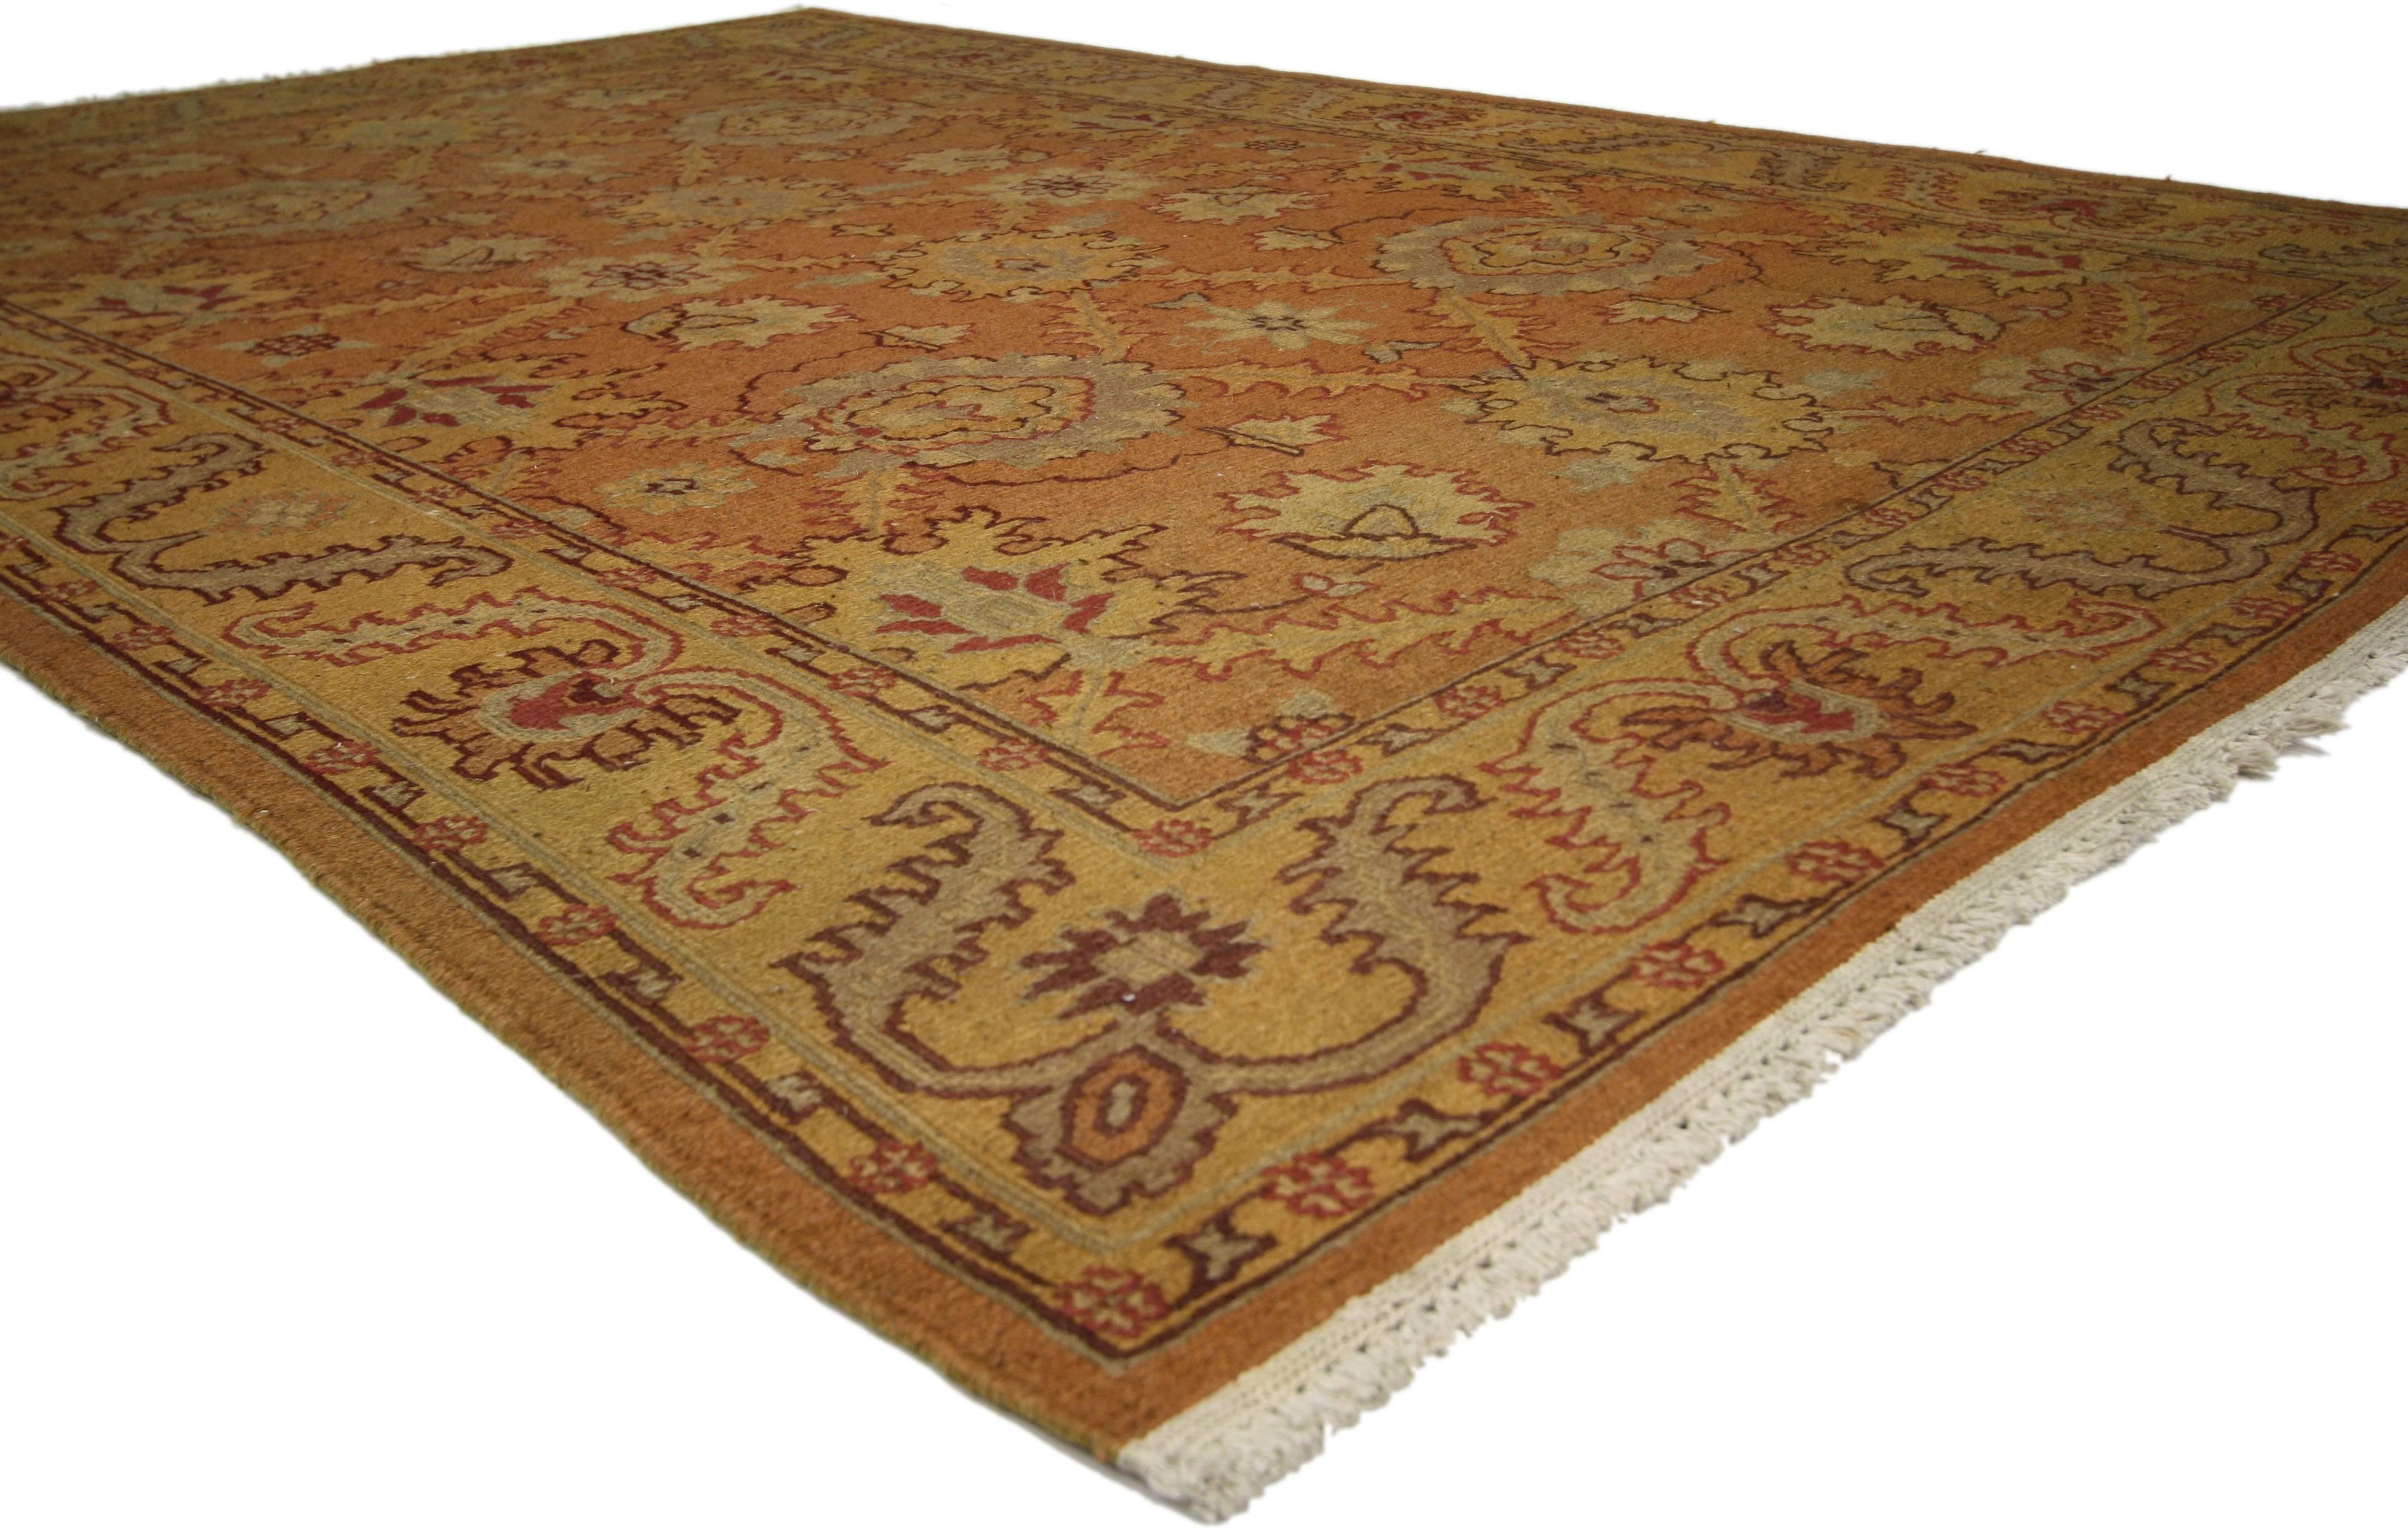 74909, vintage Chinese rug with Soumak Design and Warm Arts & Crafts style. This hand knotted wool vintage Chinese rug features an all-over floral lattice pattern spread across an abrashed orange field. The lattice is comprised of a dynamic